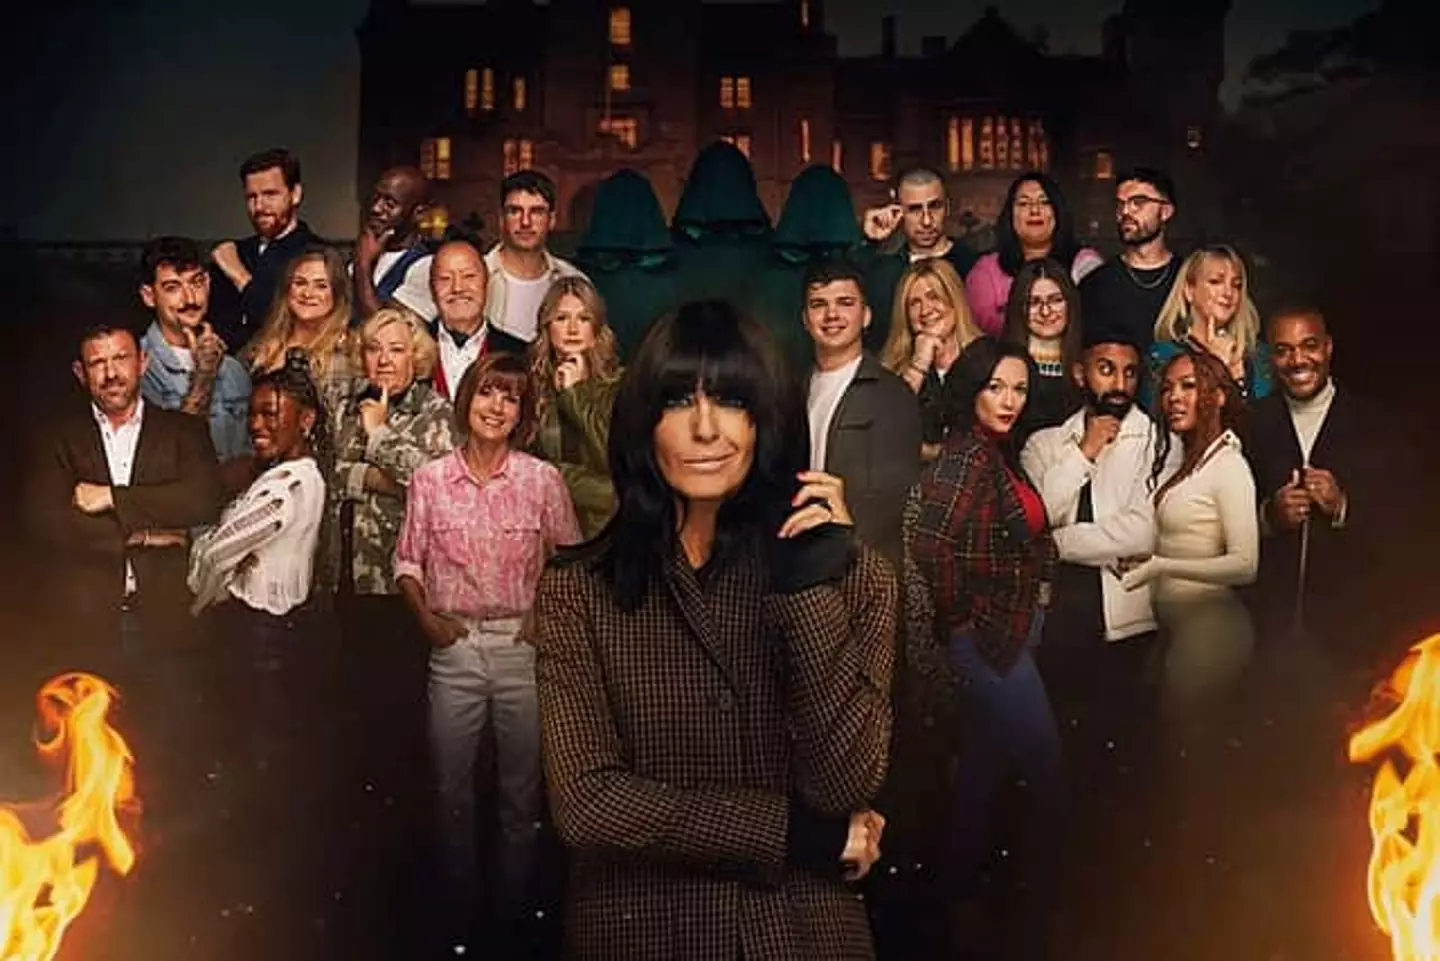 Hosted by Claudia Winkleman, the BAFTA-winning show is a reality competition where '22 strangers play the ultimate game of detection, backstabbing and trust, in the hope of winning up to £120,000'.